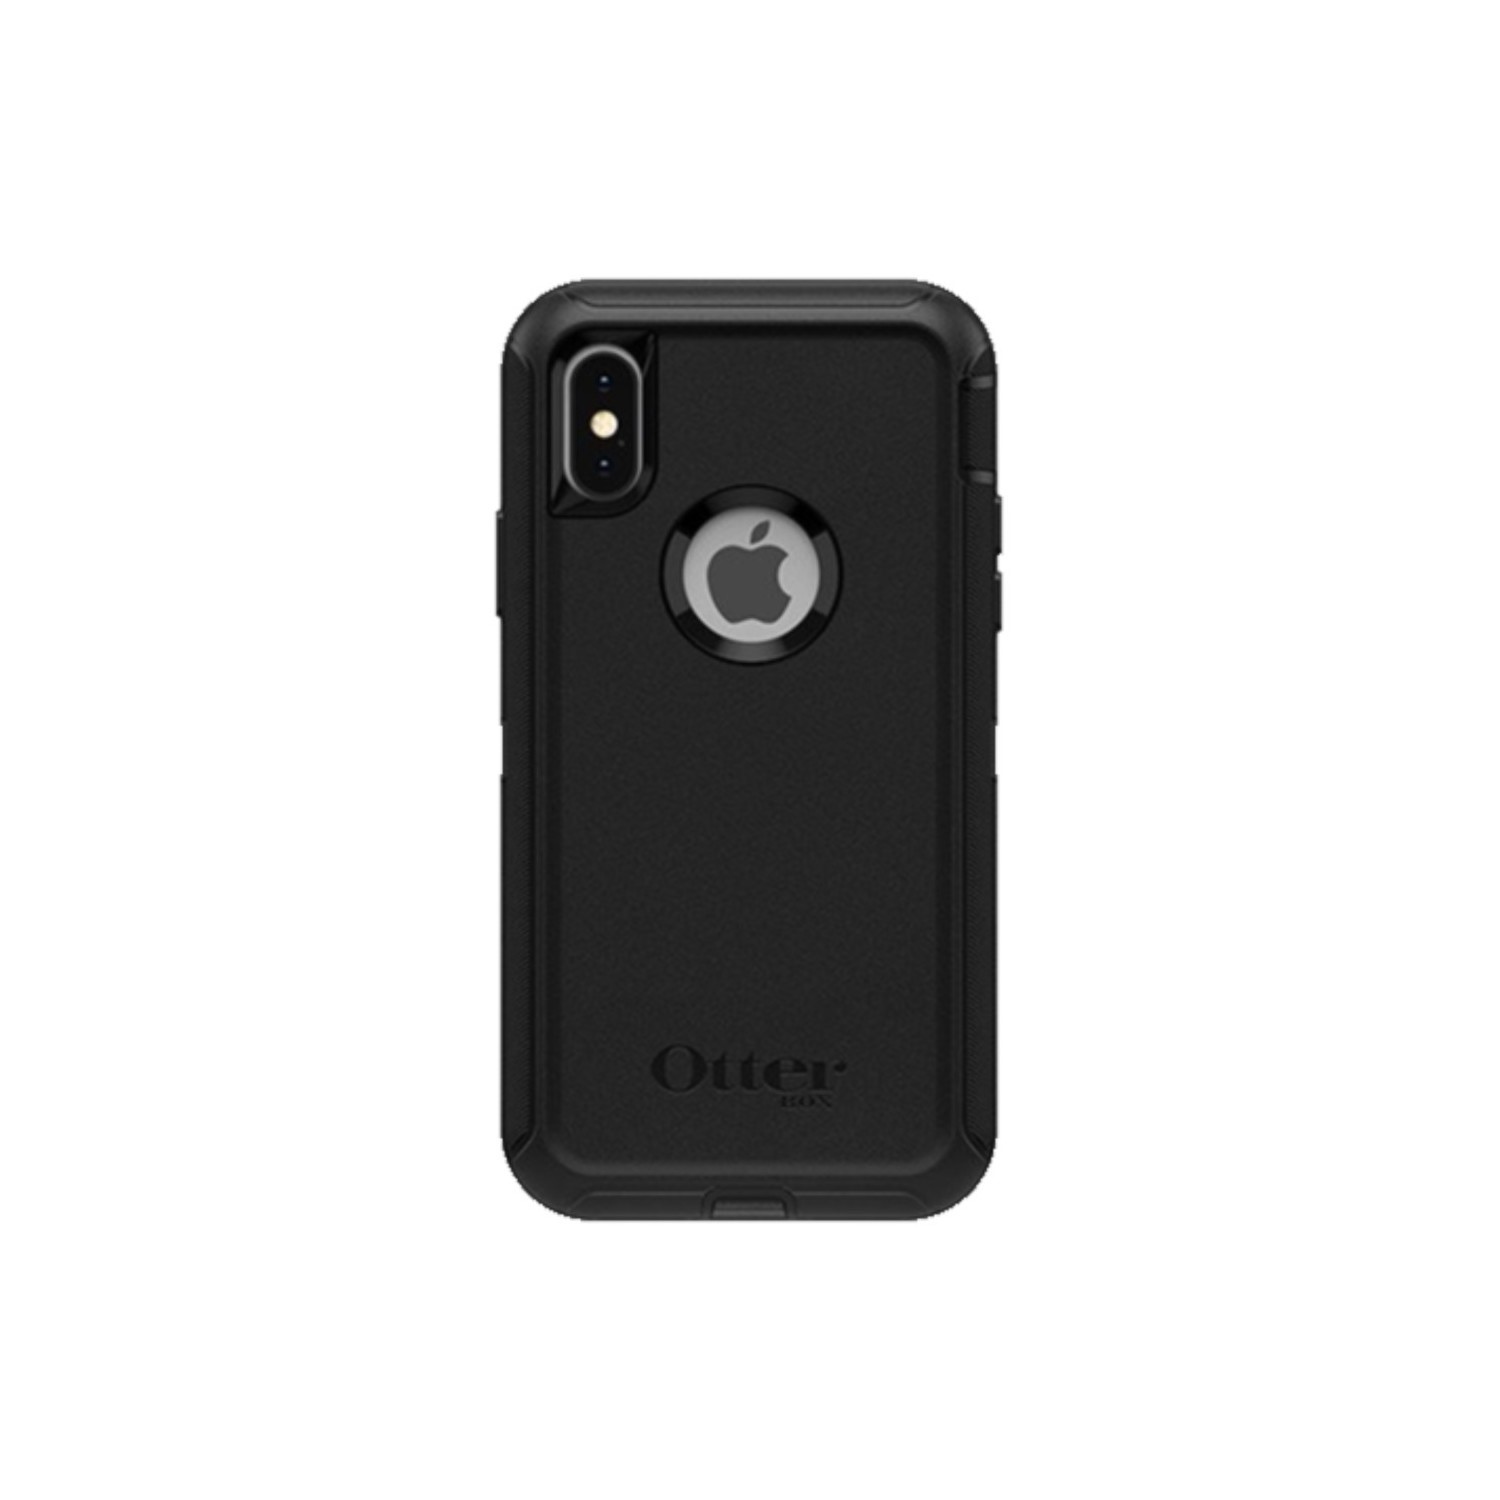 OtterBox Defender Rugged Case - iPhone X/XS - Black